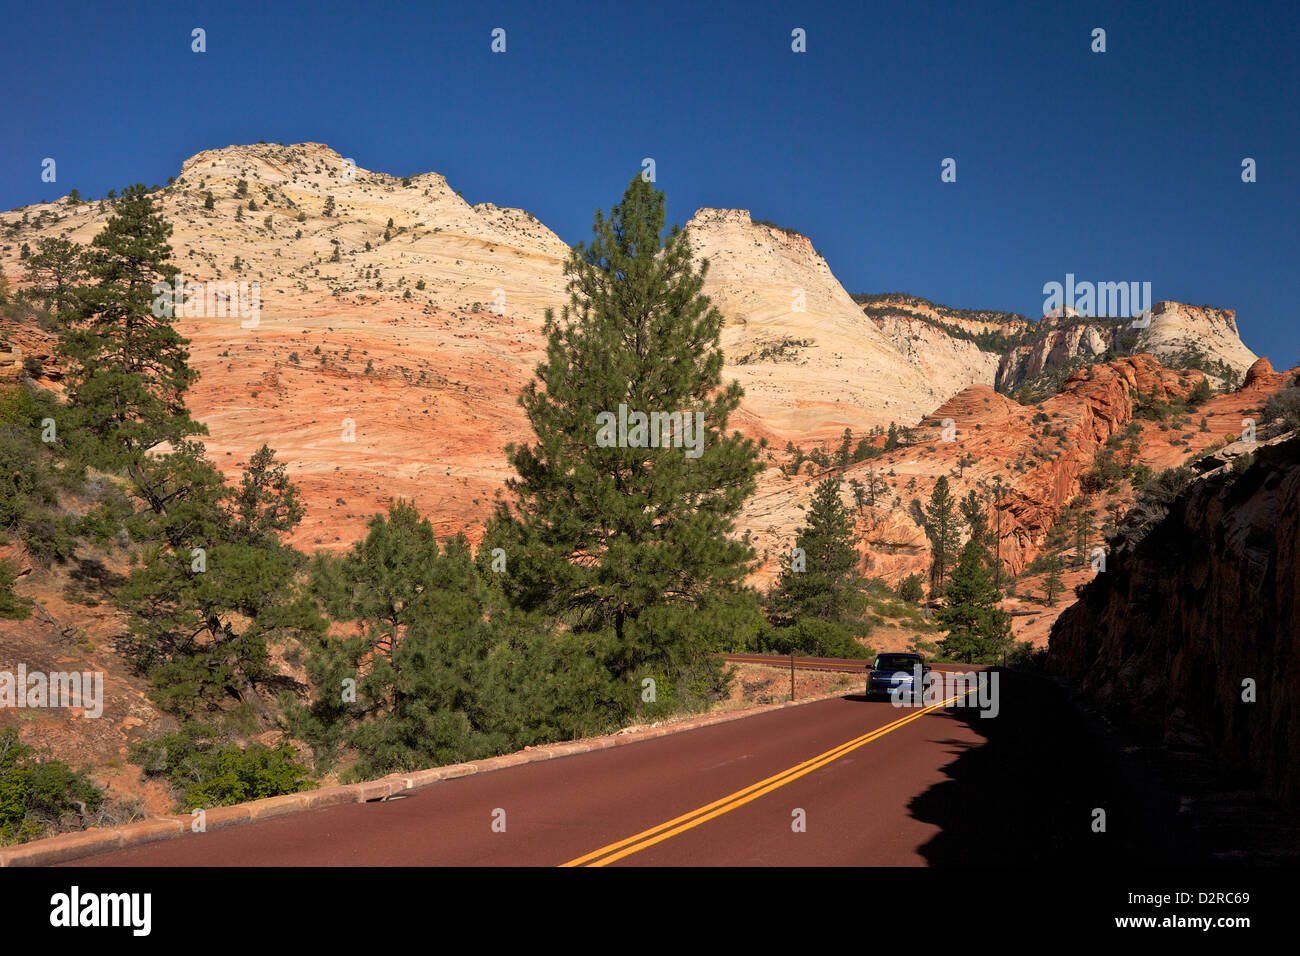 Car travelling on Zion-Mount Carmel Highway, Zion National Park, Utah, United States of America, North America Stock Photo